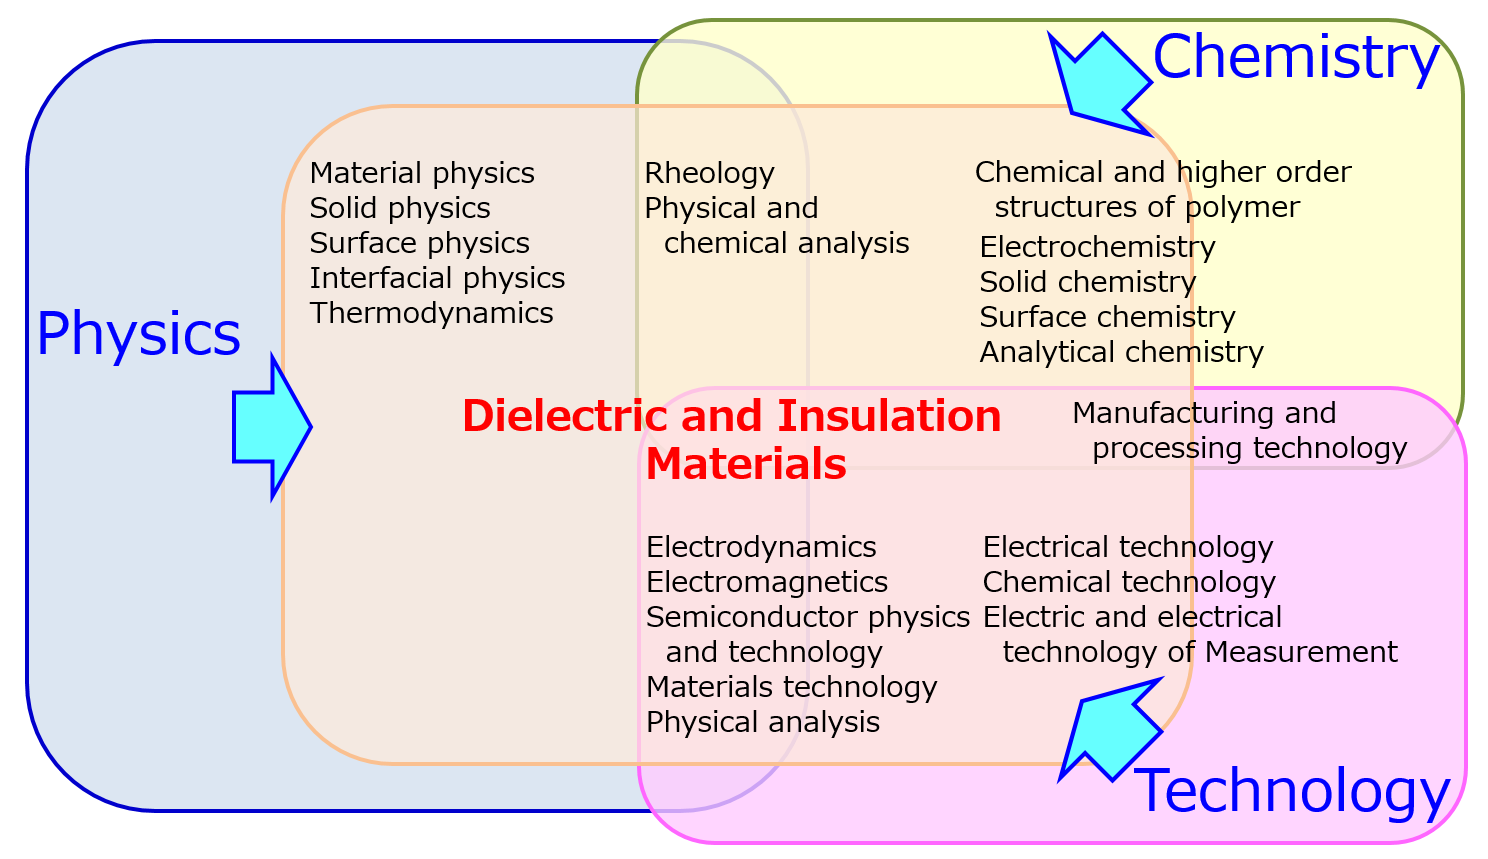 Technological fields surrounding dielectric and insulation materials